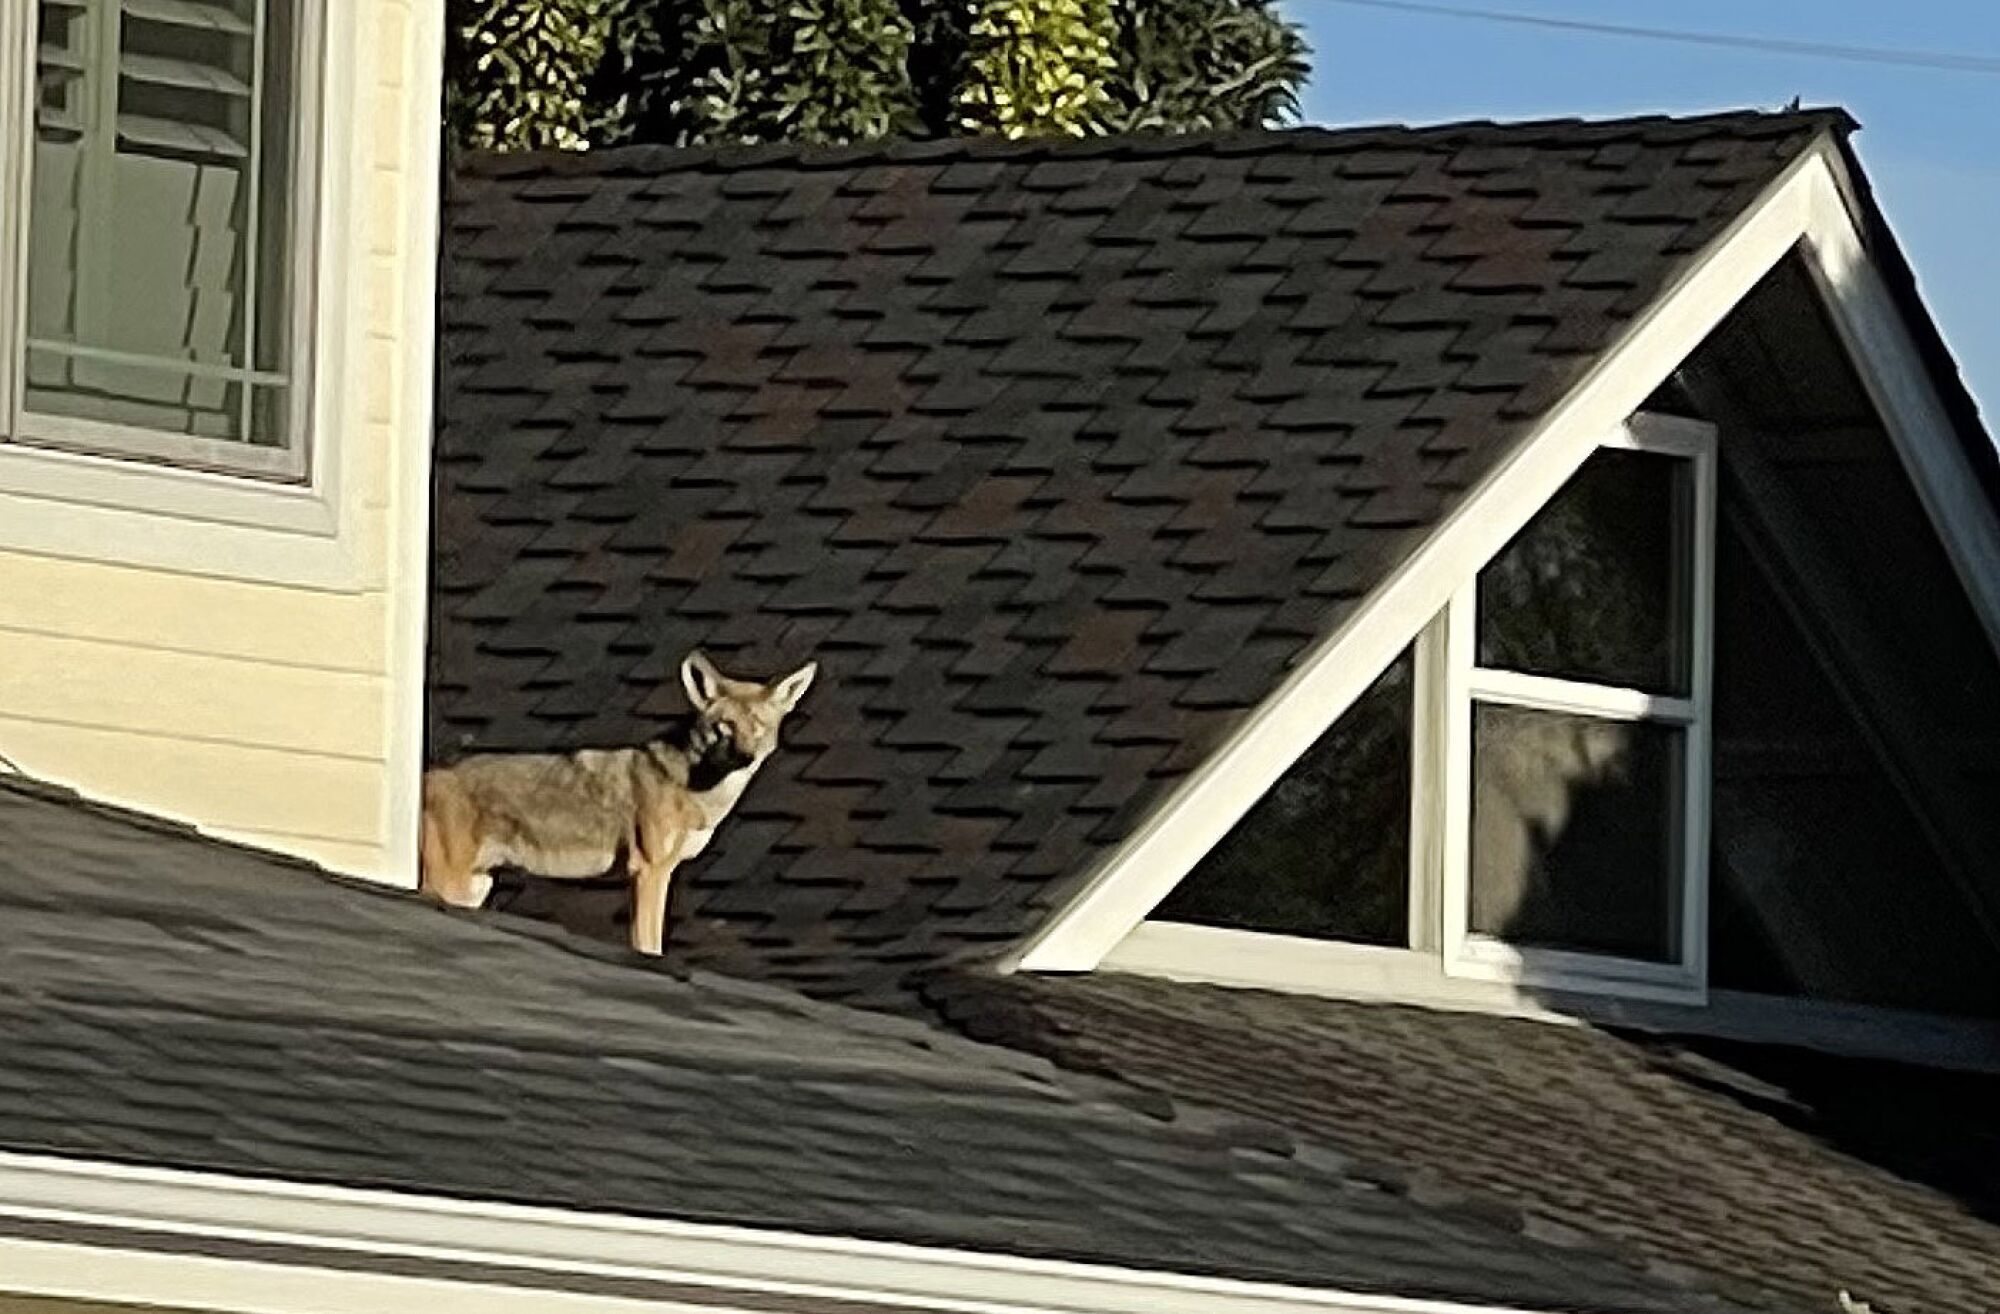 A coyote stands on the roof of a house